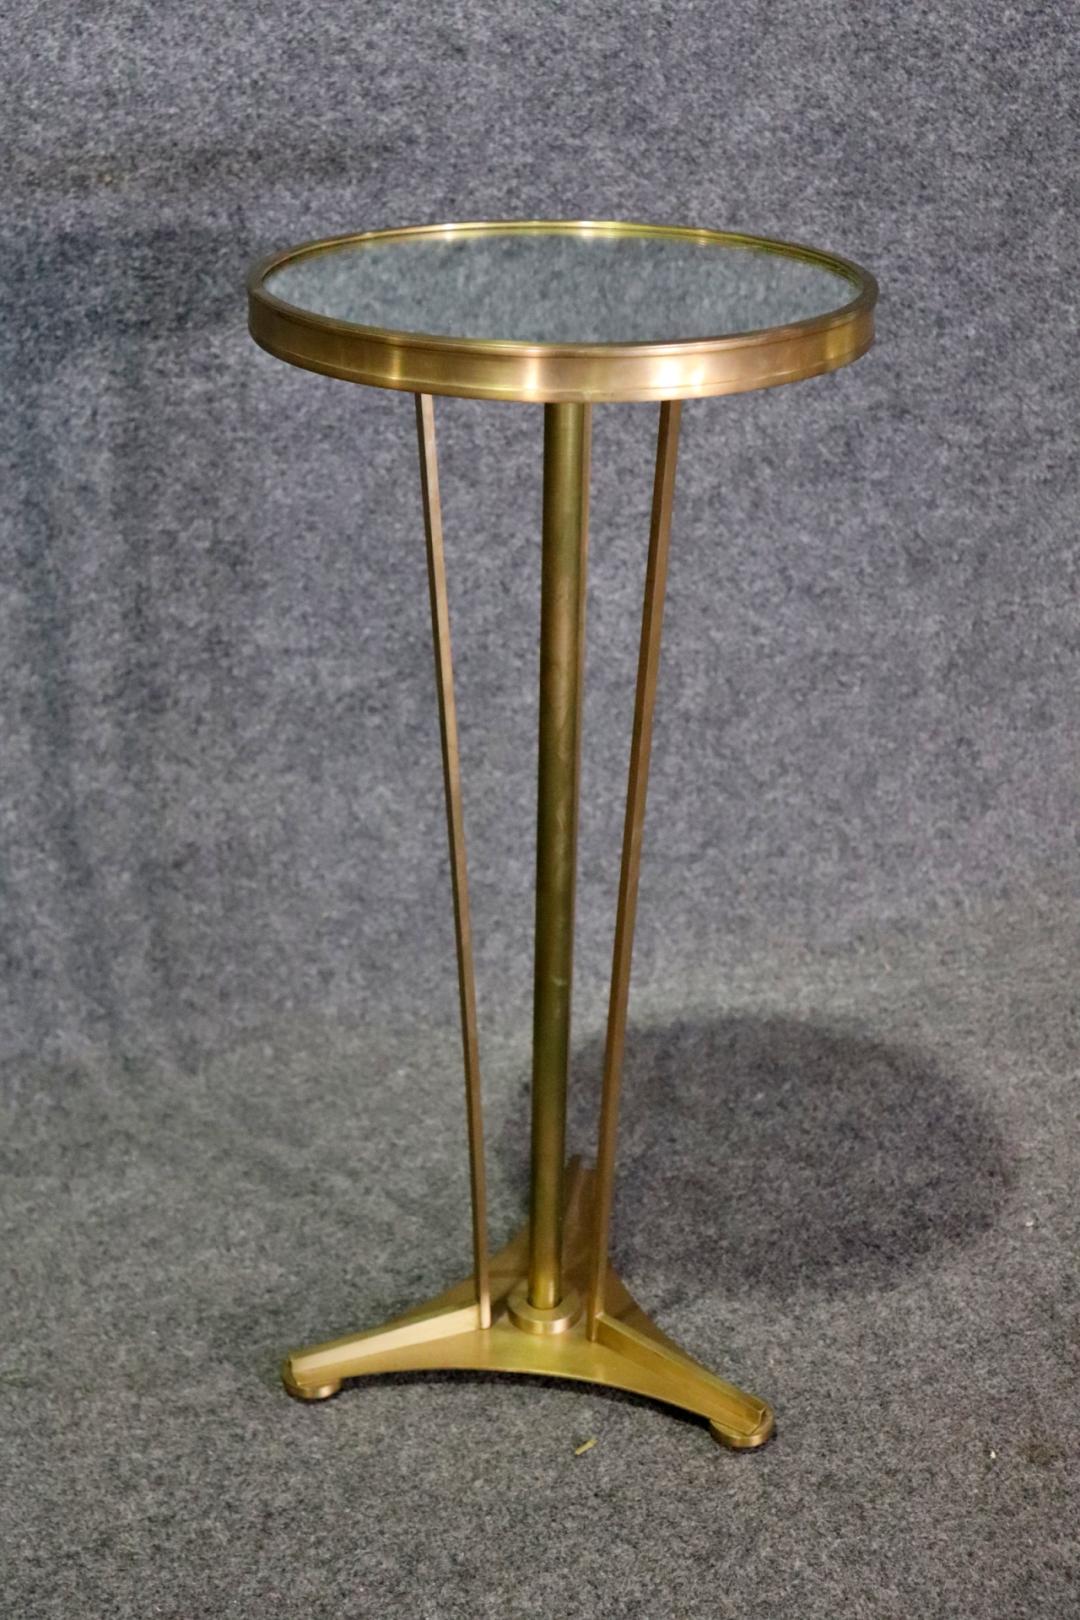 Small Mirror Top Brass Art Deco Style Gueridon End Table For Sale 1